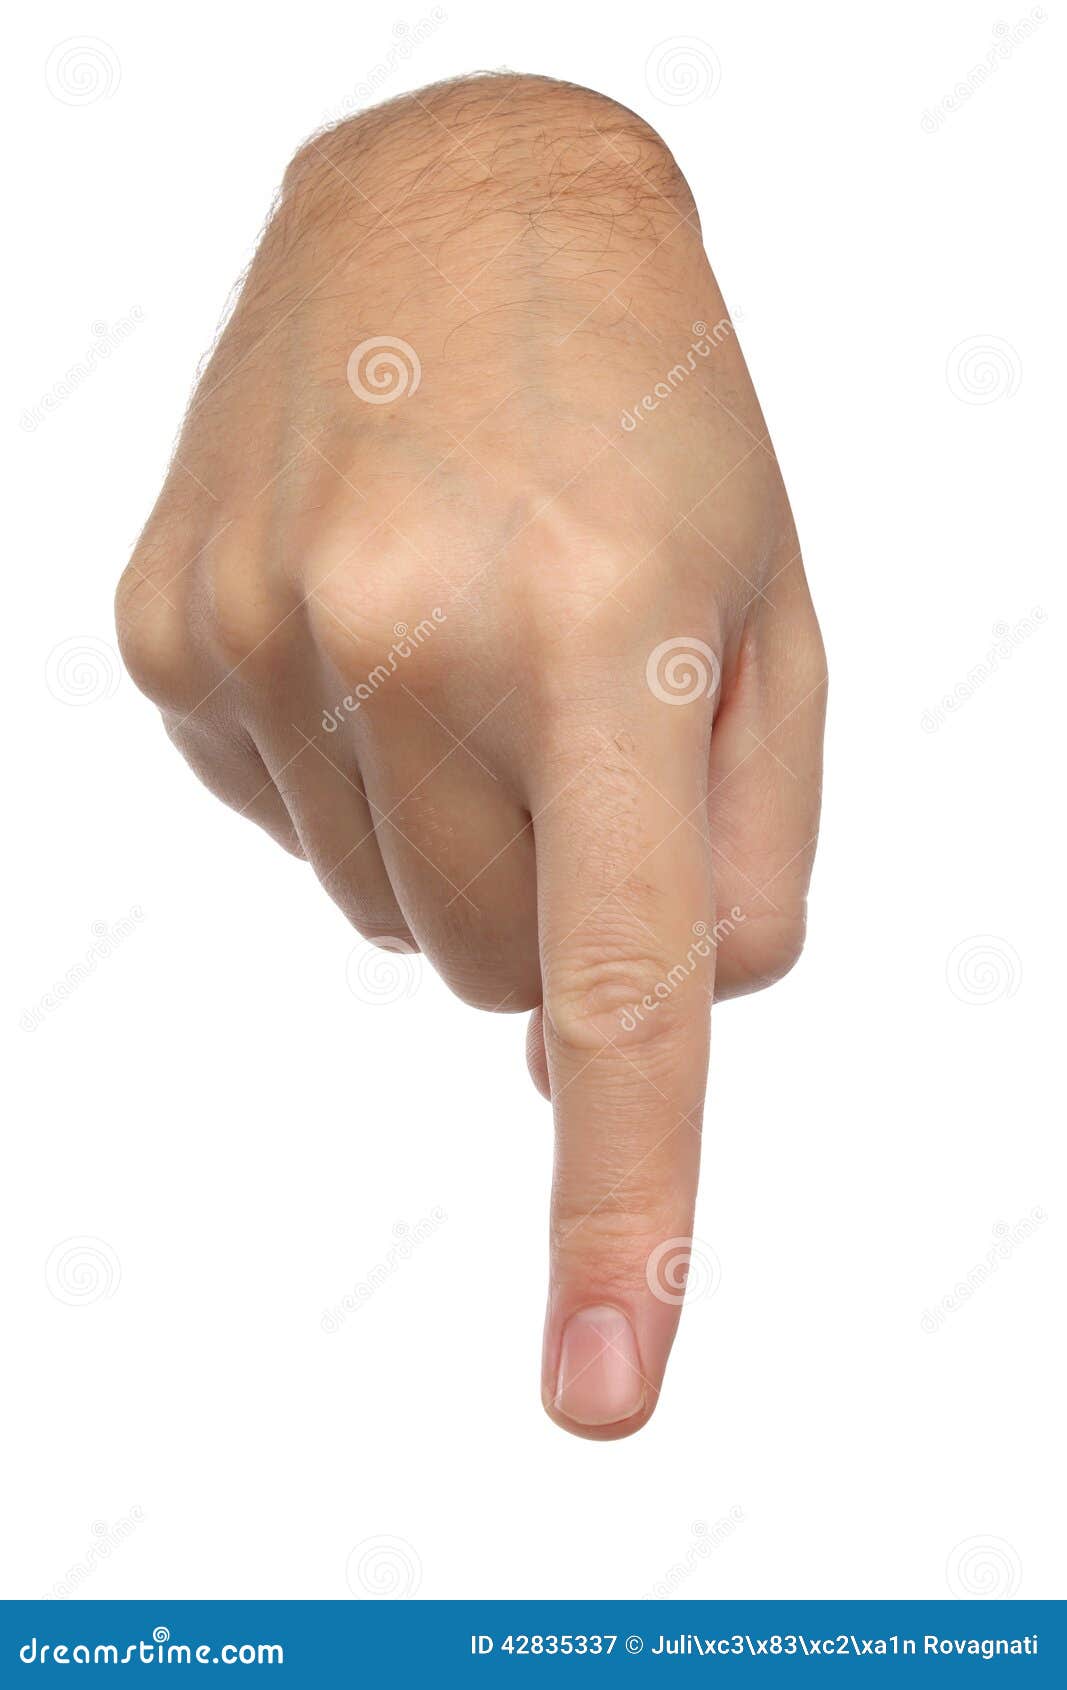 hand-signs-male-finger-pointing-down-isolated-42835337.jpg